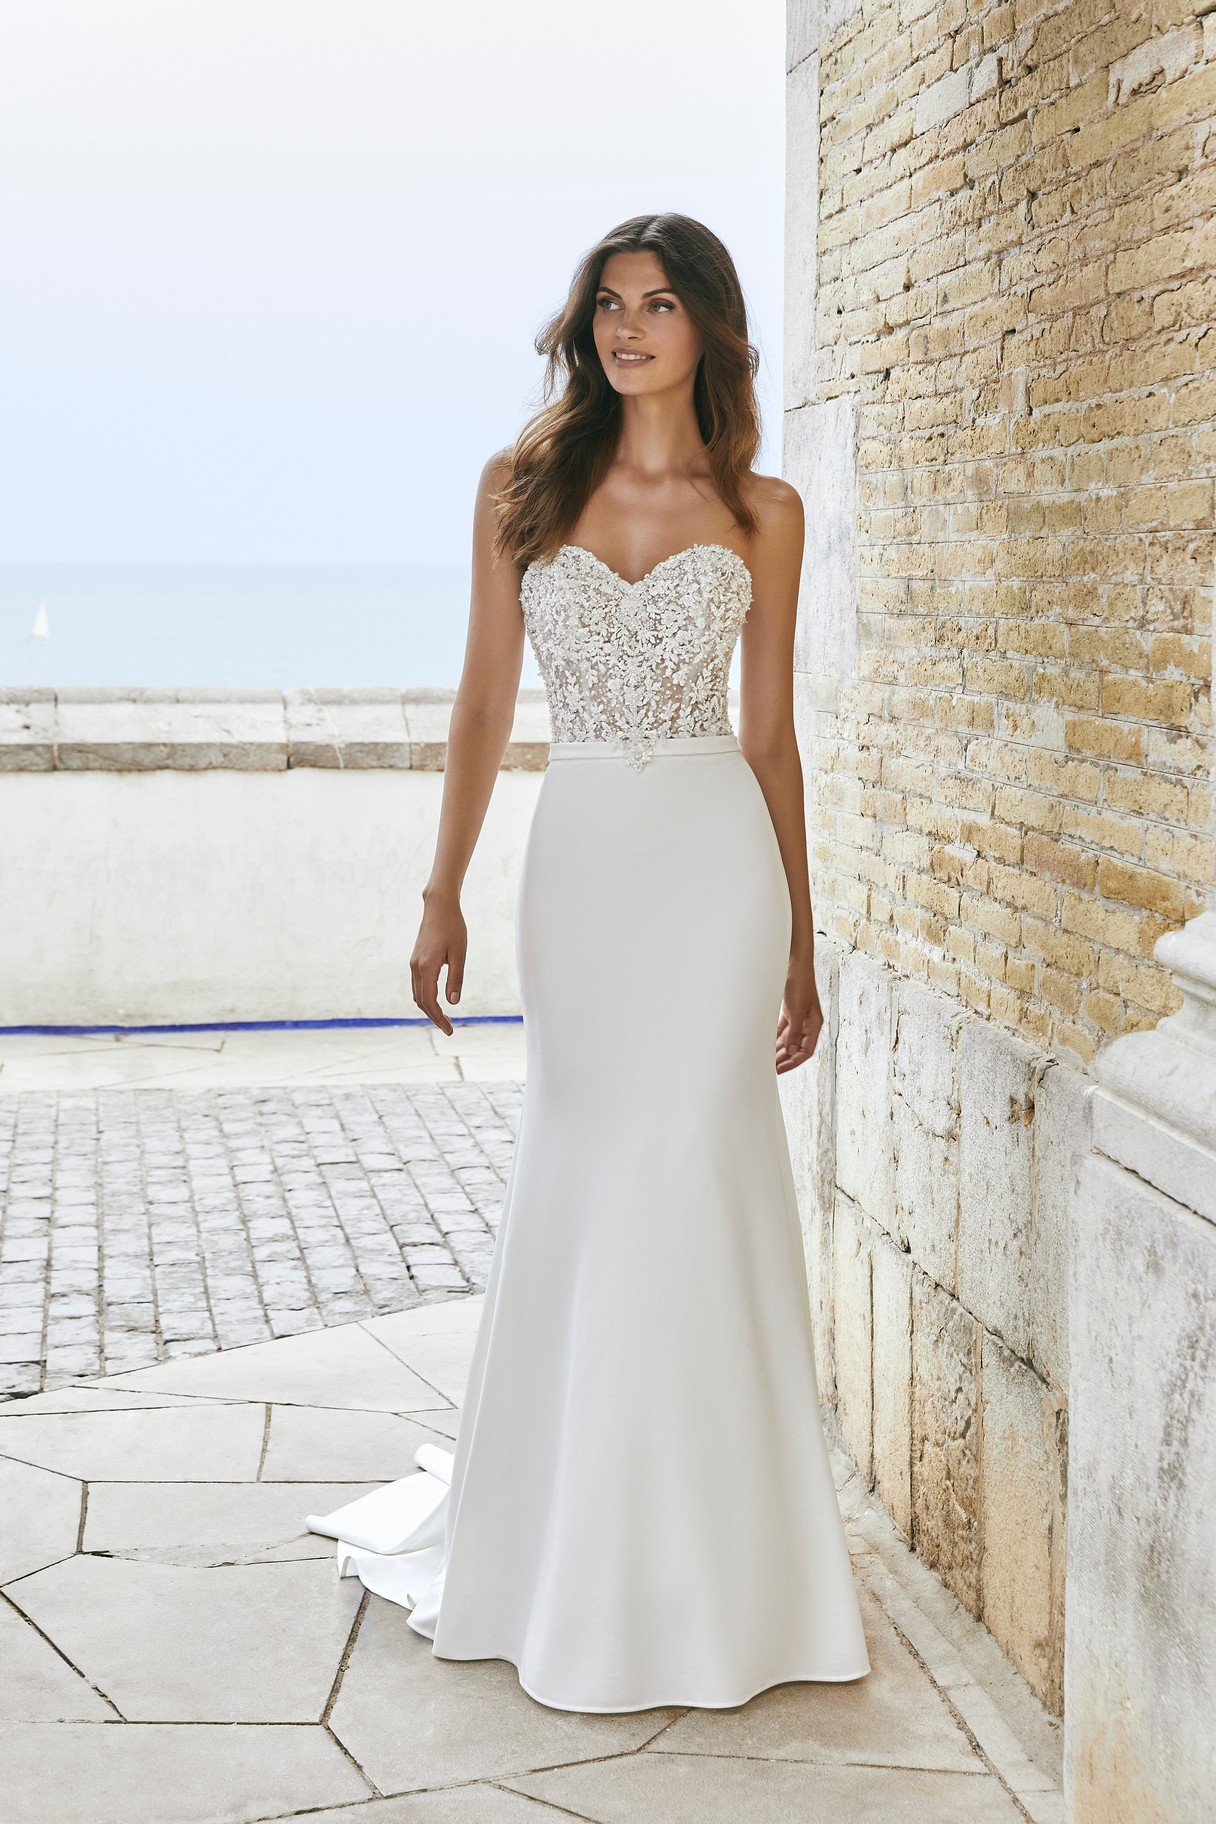 Model stood by a stone wall in Ronald Joyce style 18604, an elegant fit and flare wedding dress with a beaded sweetheart bodice, plain skirt and matching delicate belt